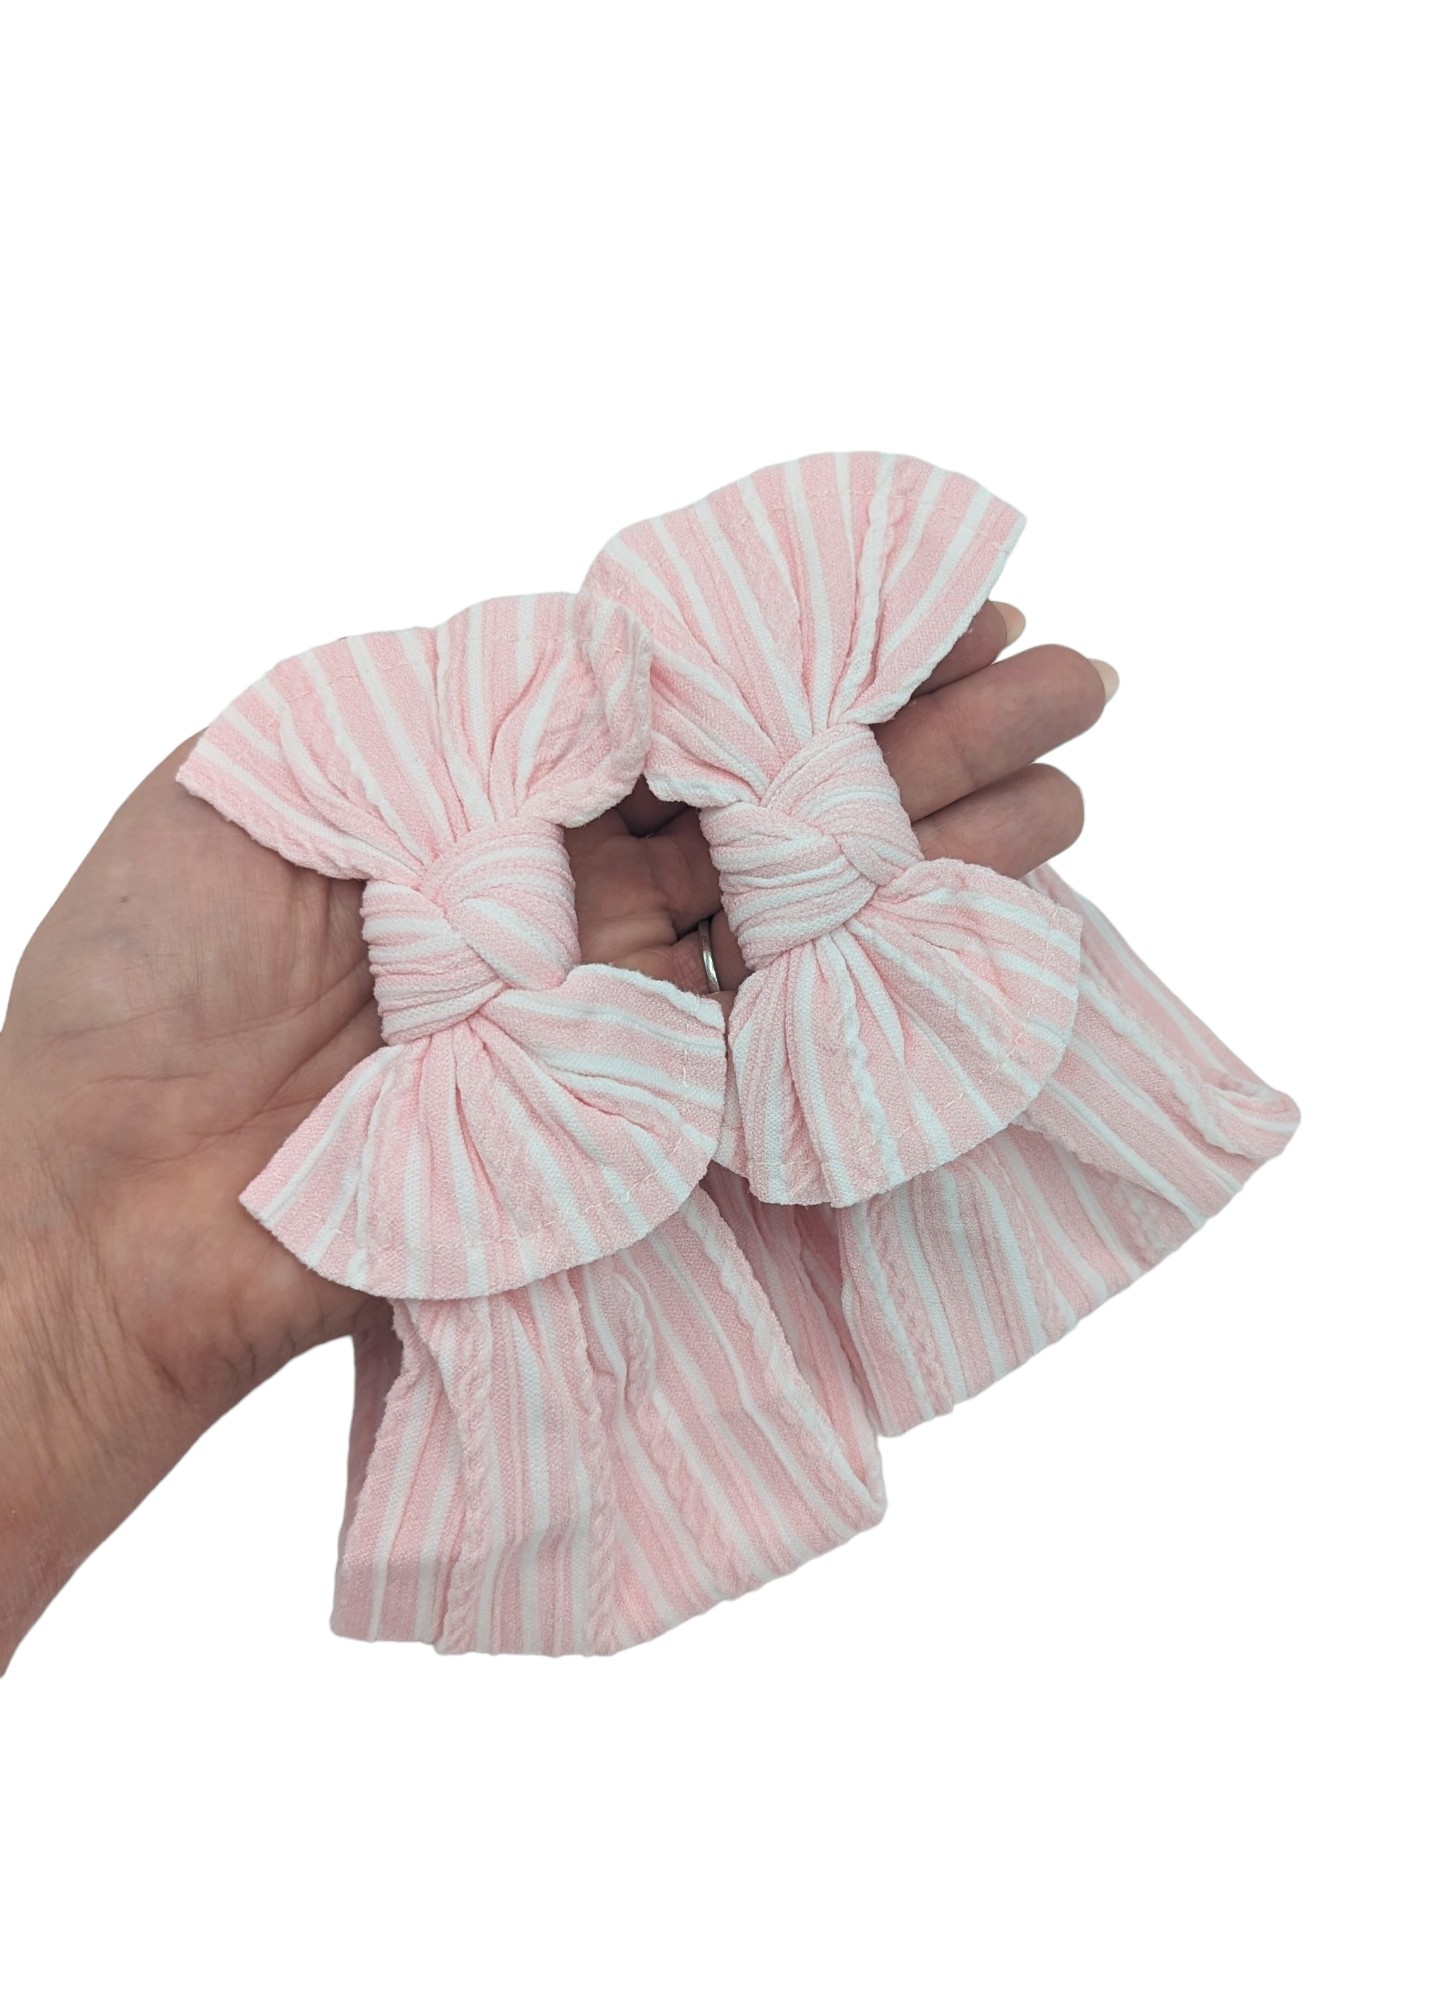 Mummy and Me Matching Pink and White Pinstripe Cable Knit Bow Headwraps - Betty Brown Boutique Ltd